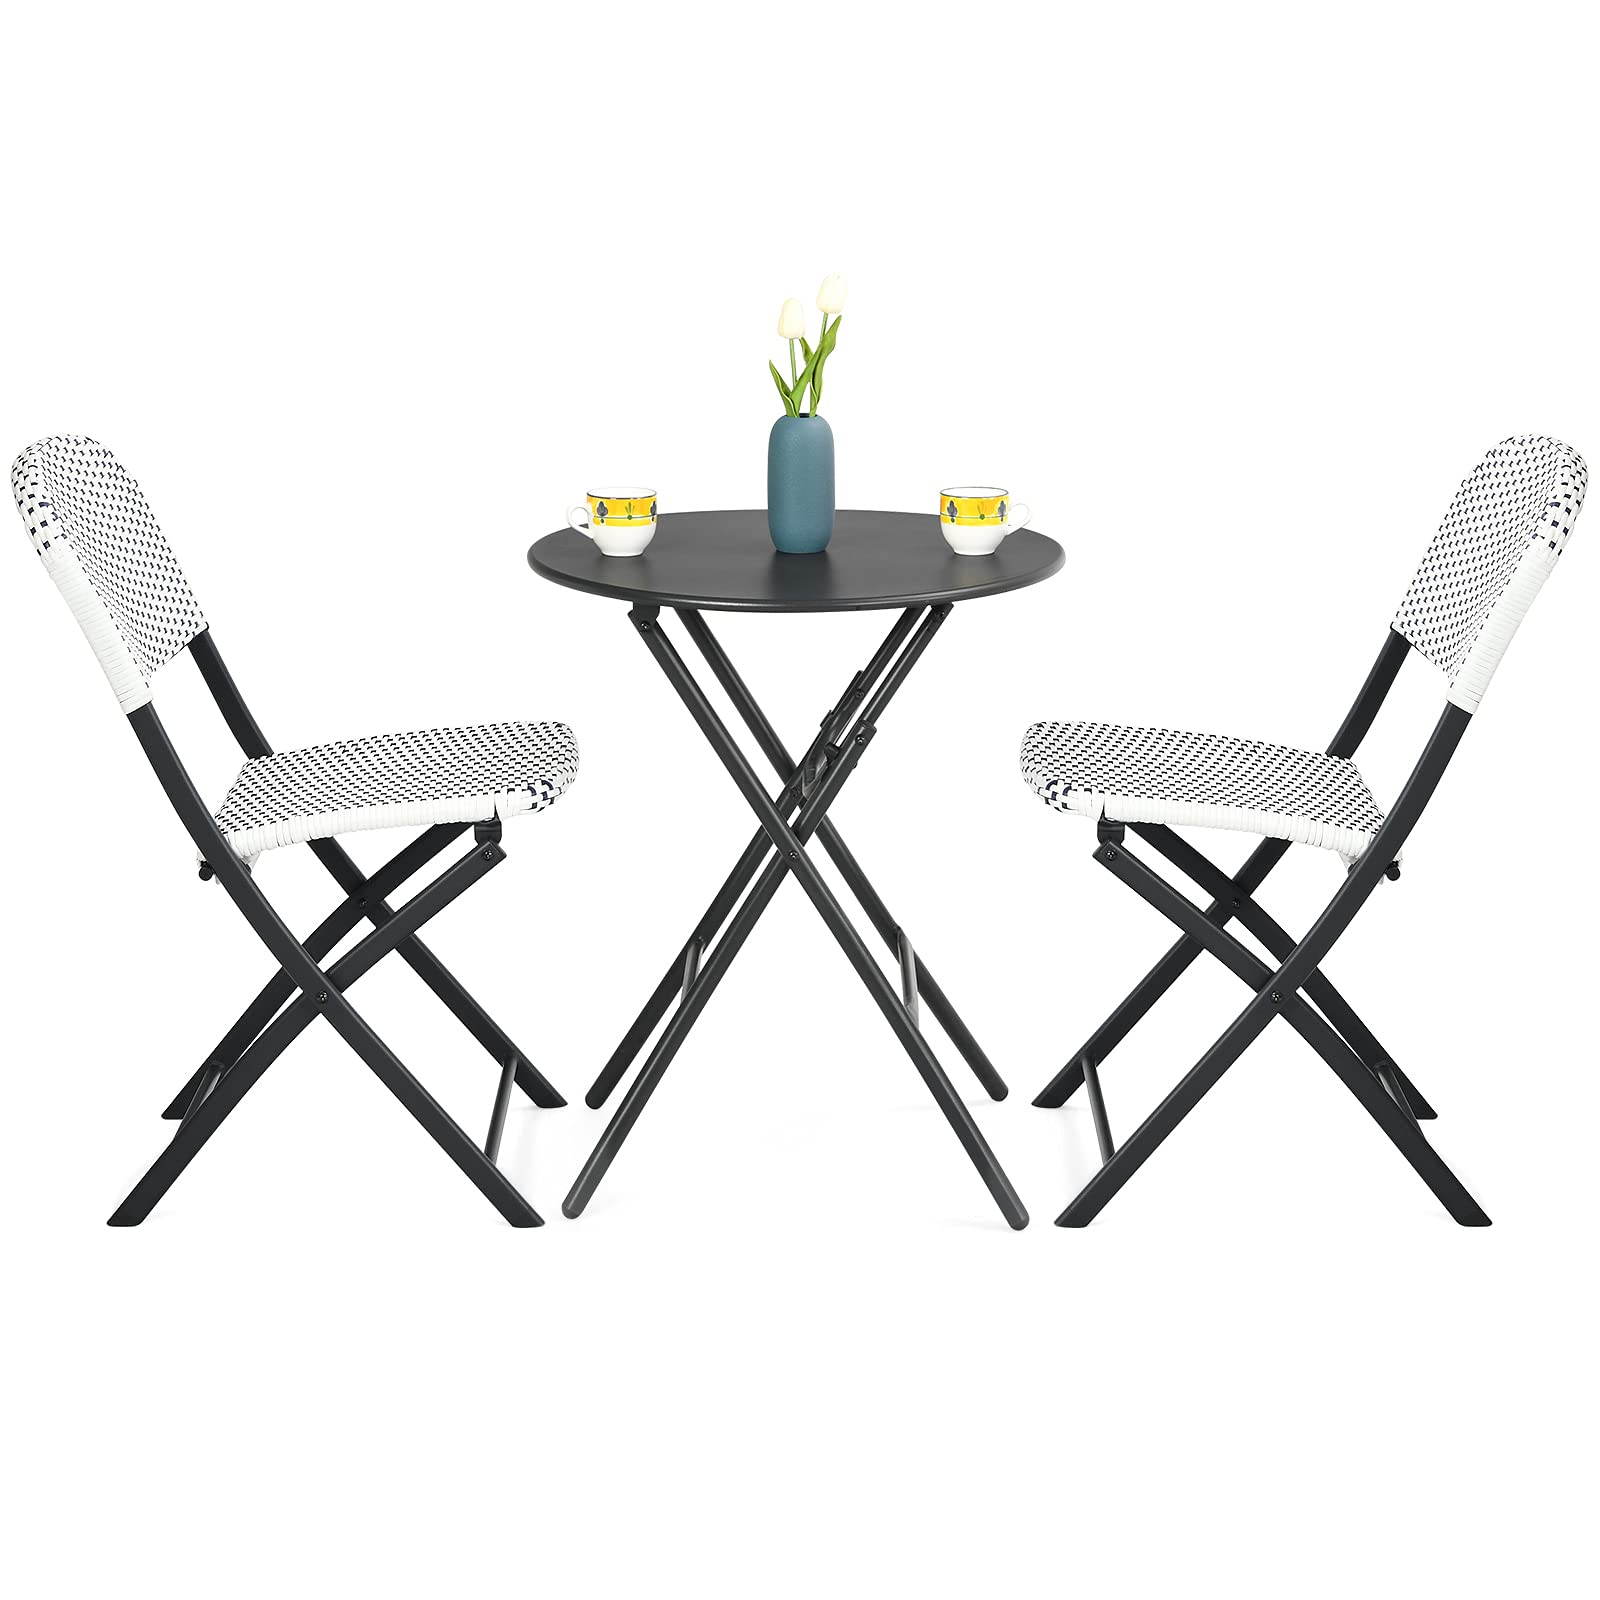 Giantex 3 Pieces Patio Dining Set, Folding Bistro Table with 2 Rattan Chairs